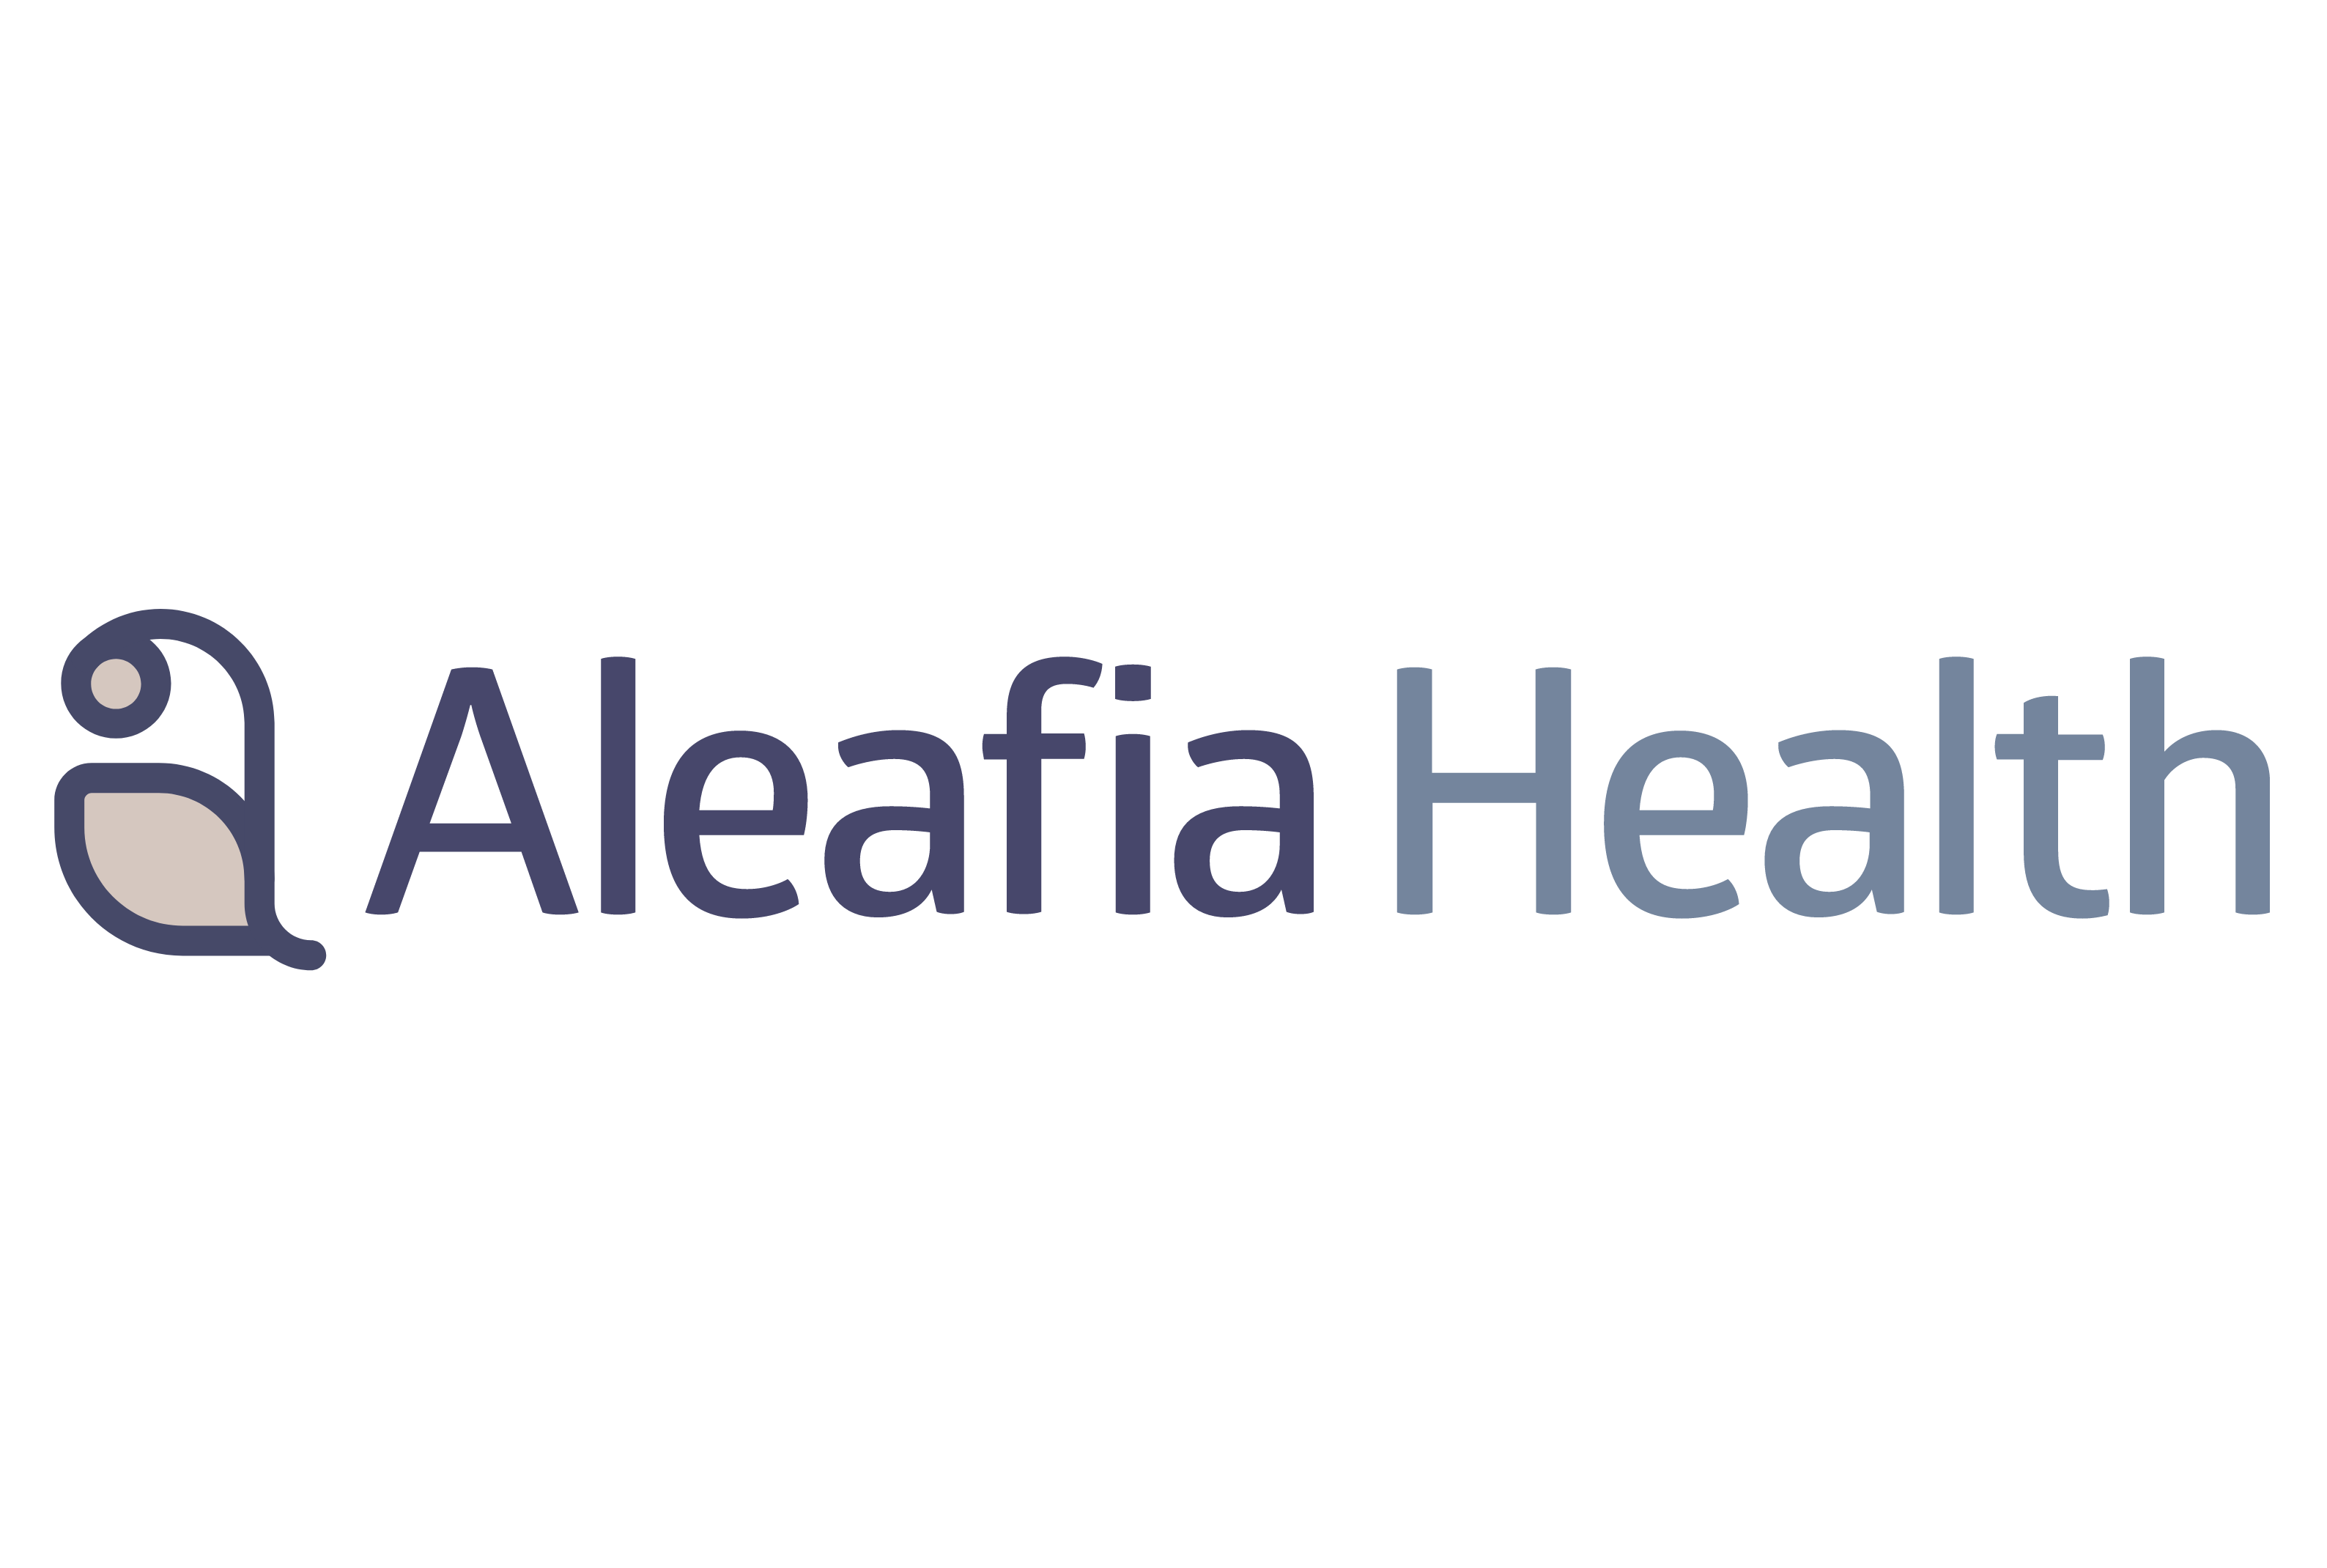 Aleafia Health Successfully Completes TSX Review and Announces Entry into Fifth Province